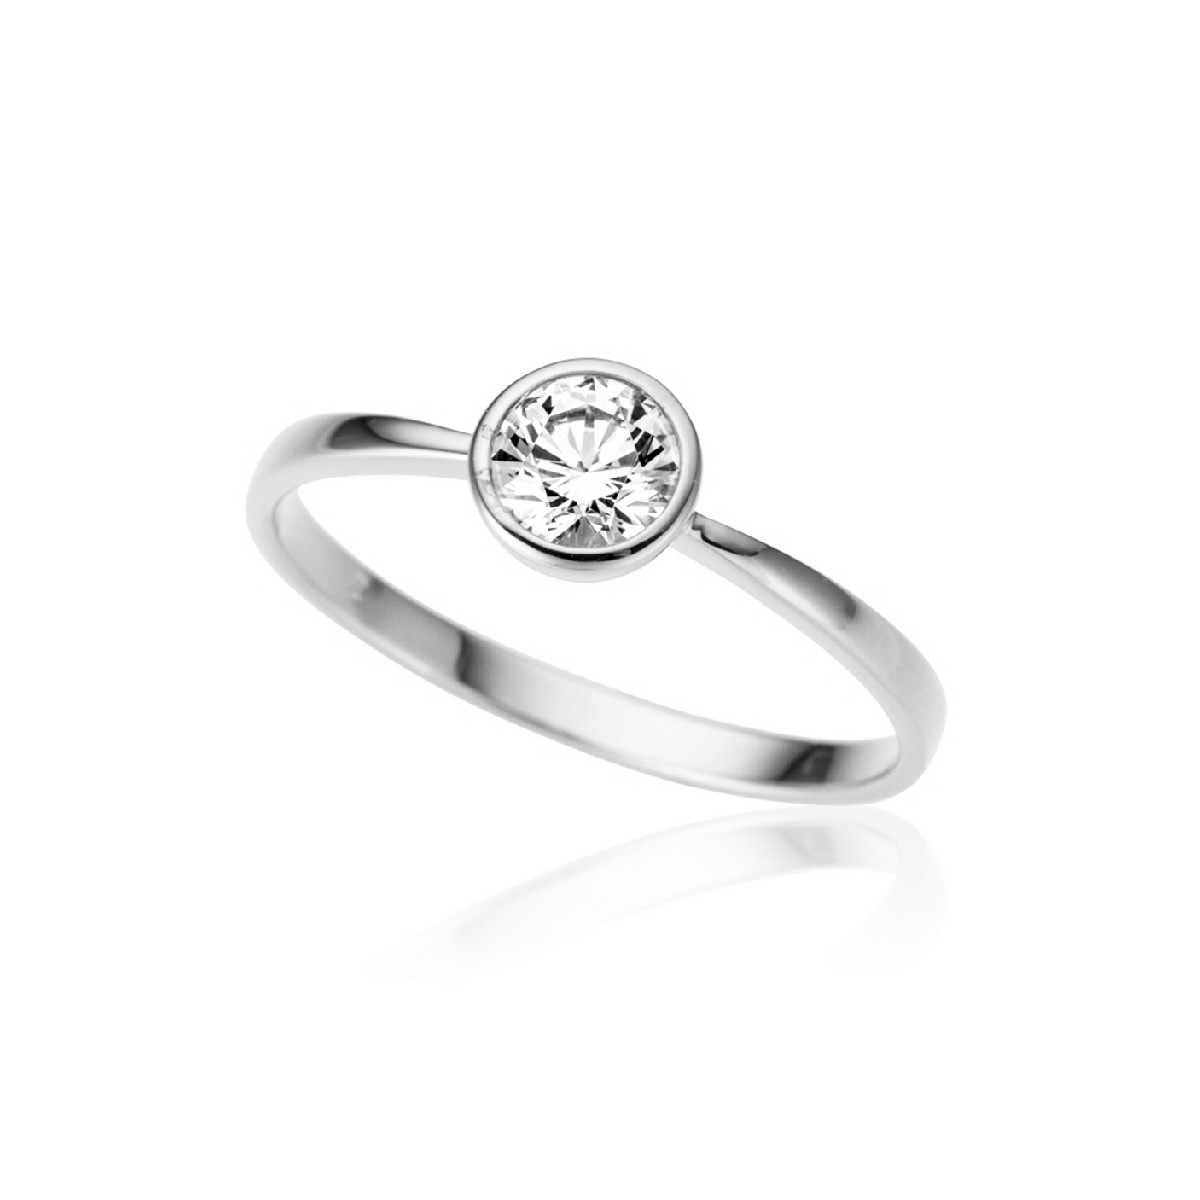 WHITE GOLD RING WITH ZIRCON SETTING